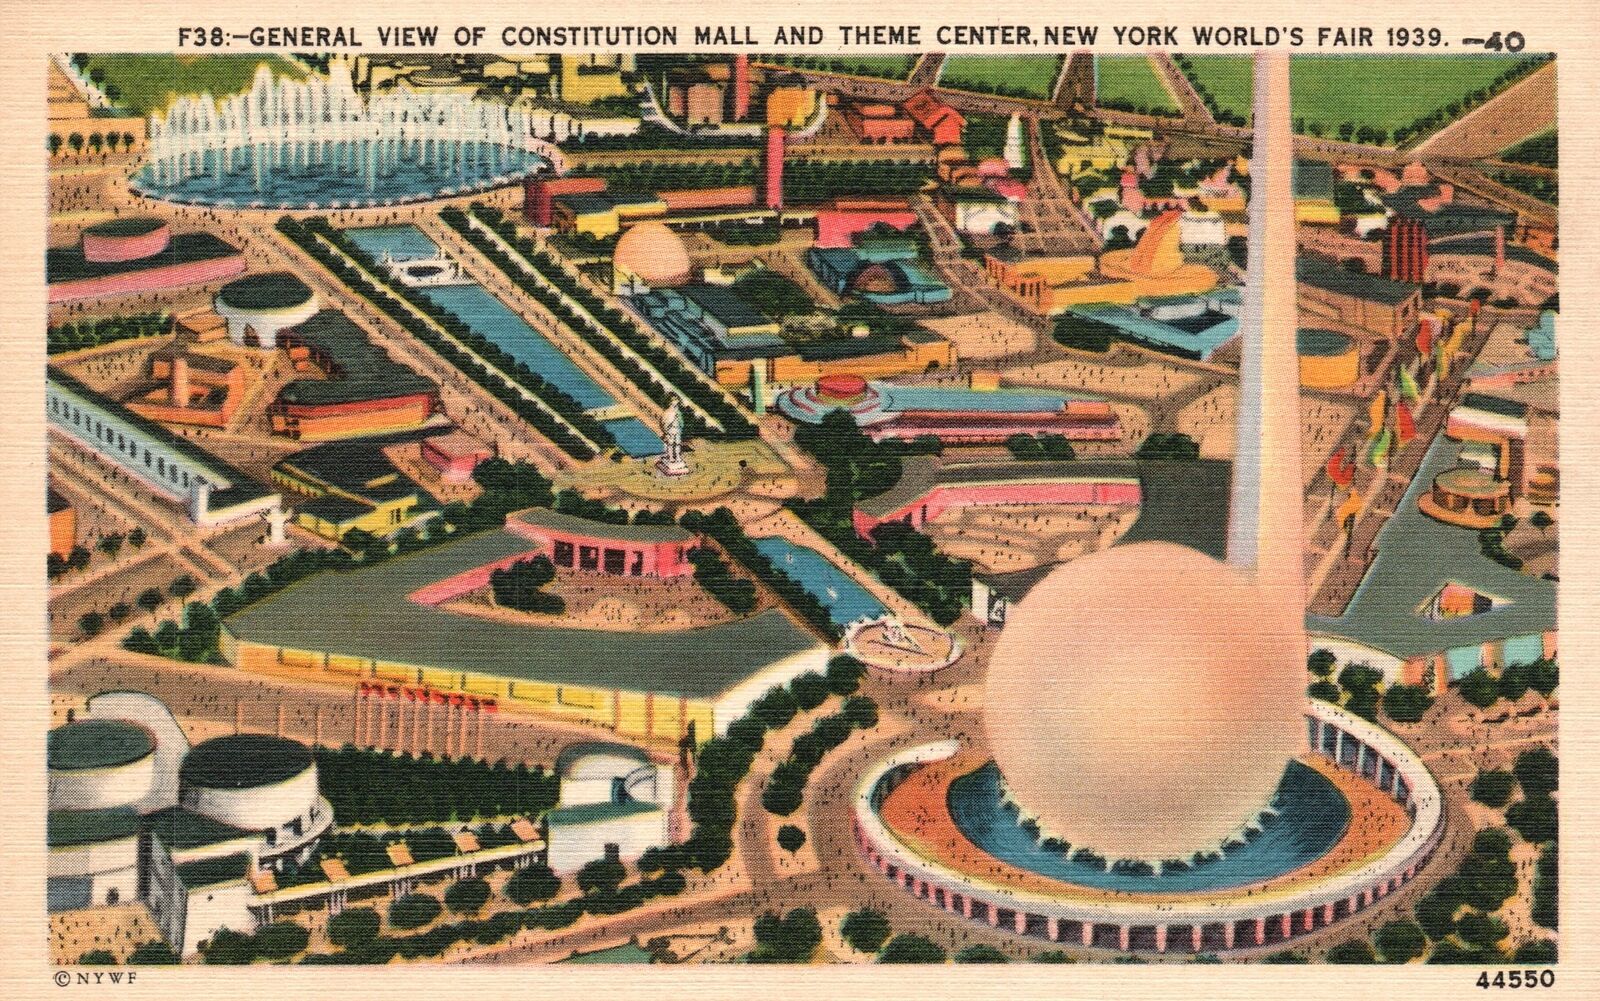 Vintage Postcard General View Of Constitution Mall & Theme Center New York Fair